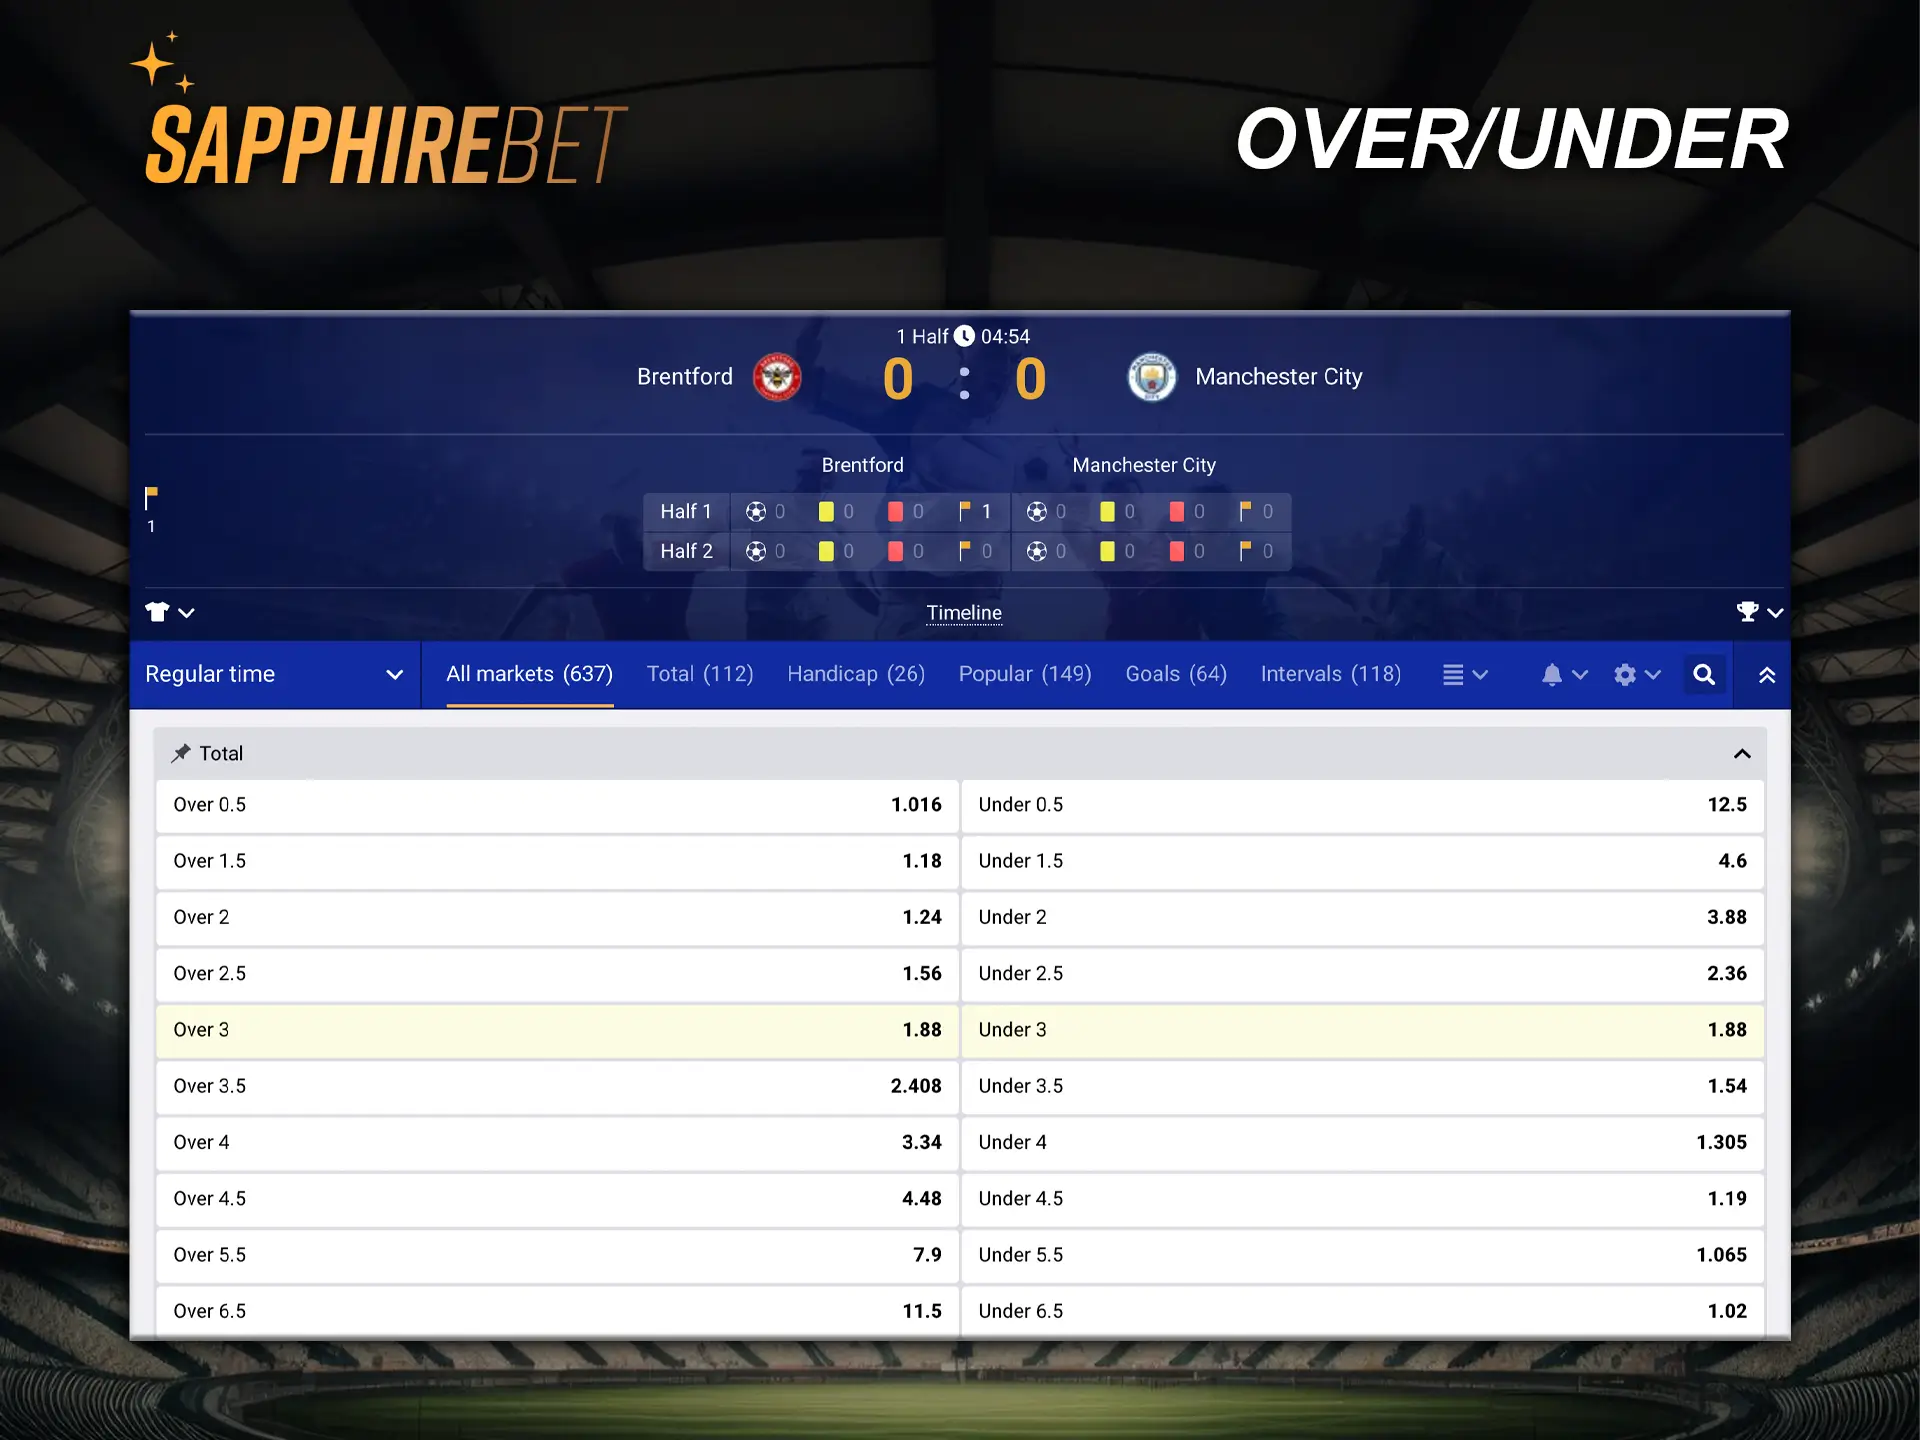 At SapphireBet, betting on the number of goals scored in a match is always available.